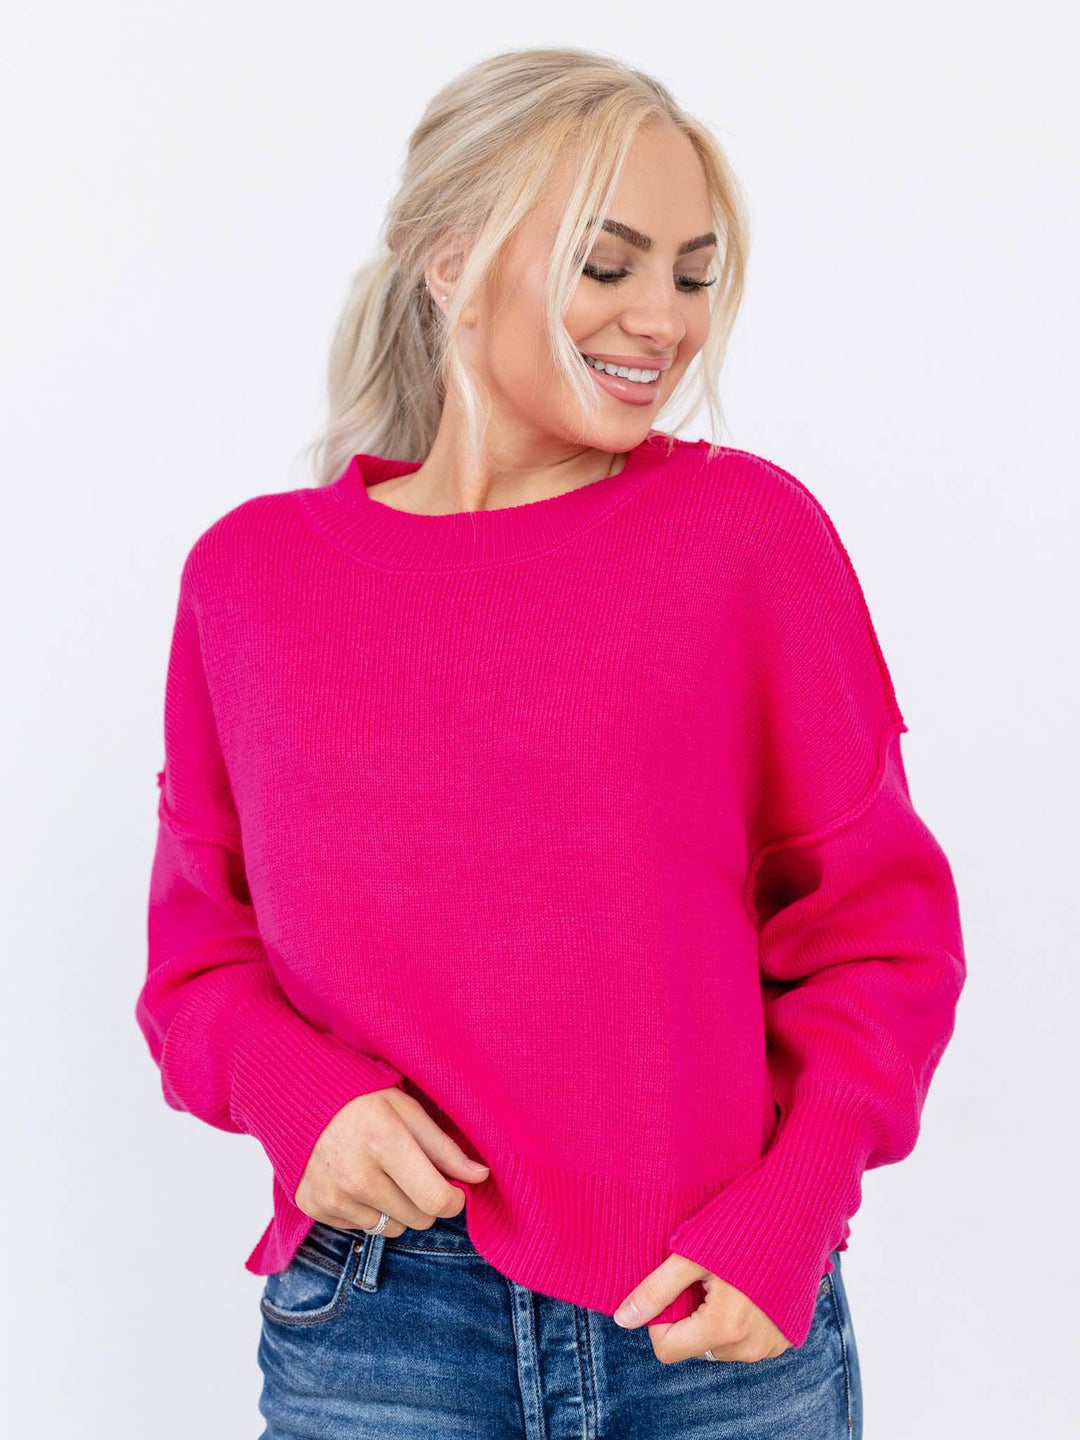 Newbury Kustom-Slouched Silhouette Pullover Sweater - Leela and Lavender